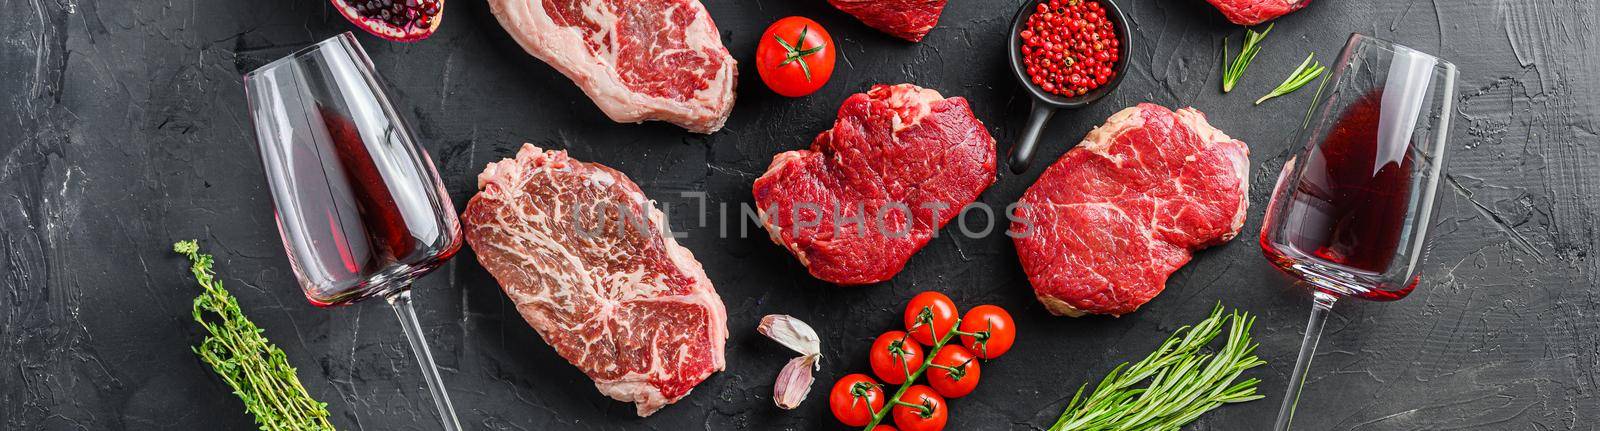 Set of various classic, alternative raw meatsteaks with glasses of red wine over black background top view. Big banner size. by Ilianesolenyi